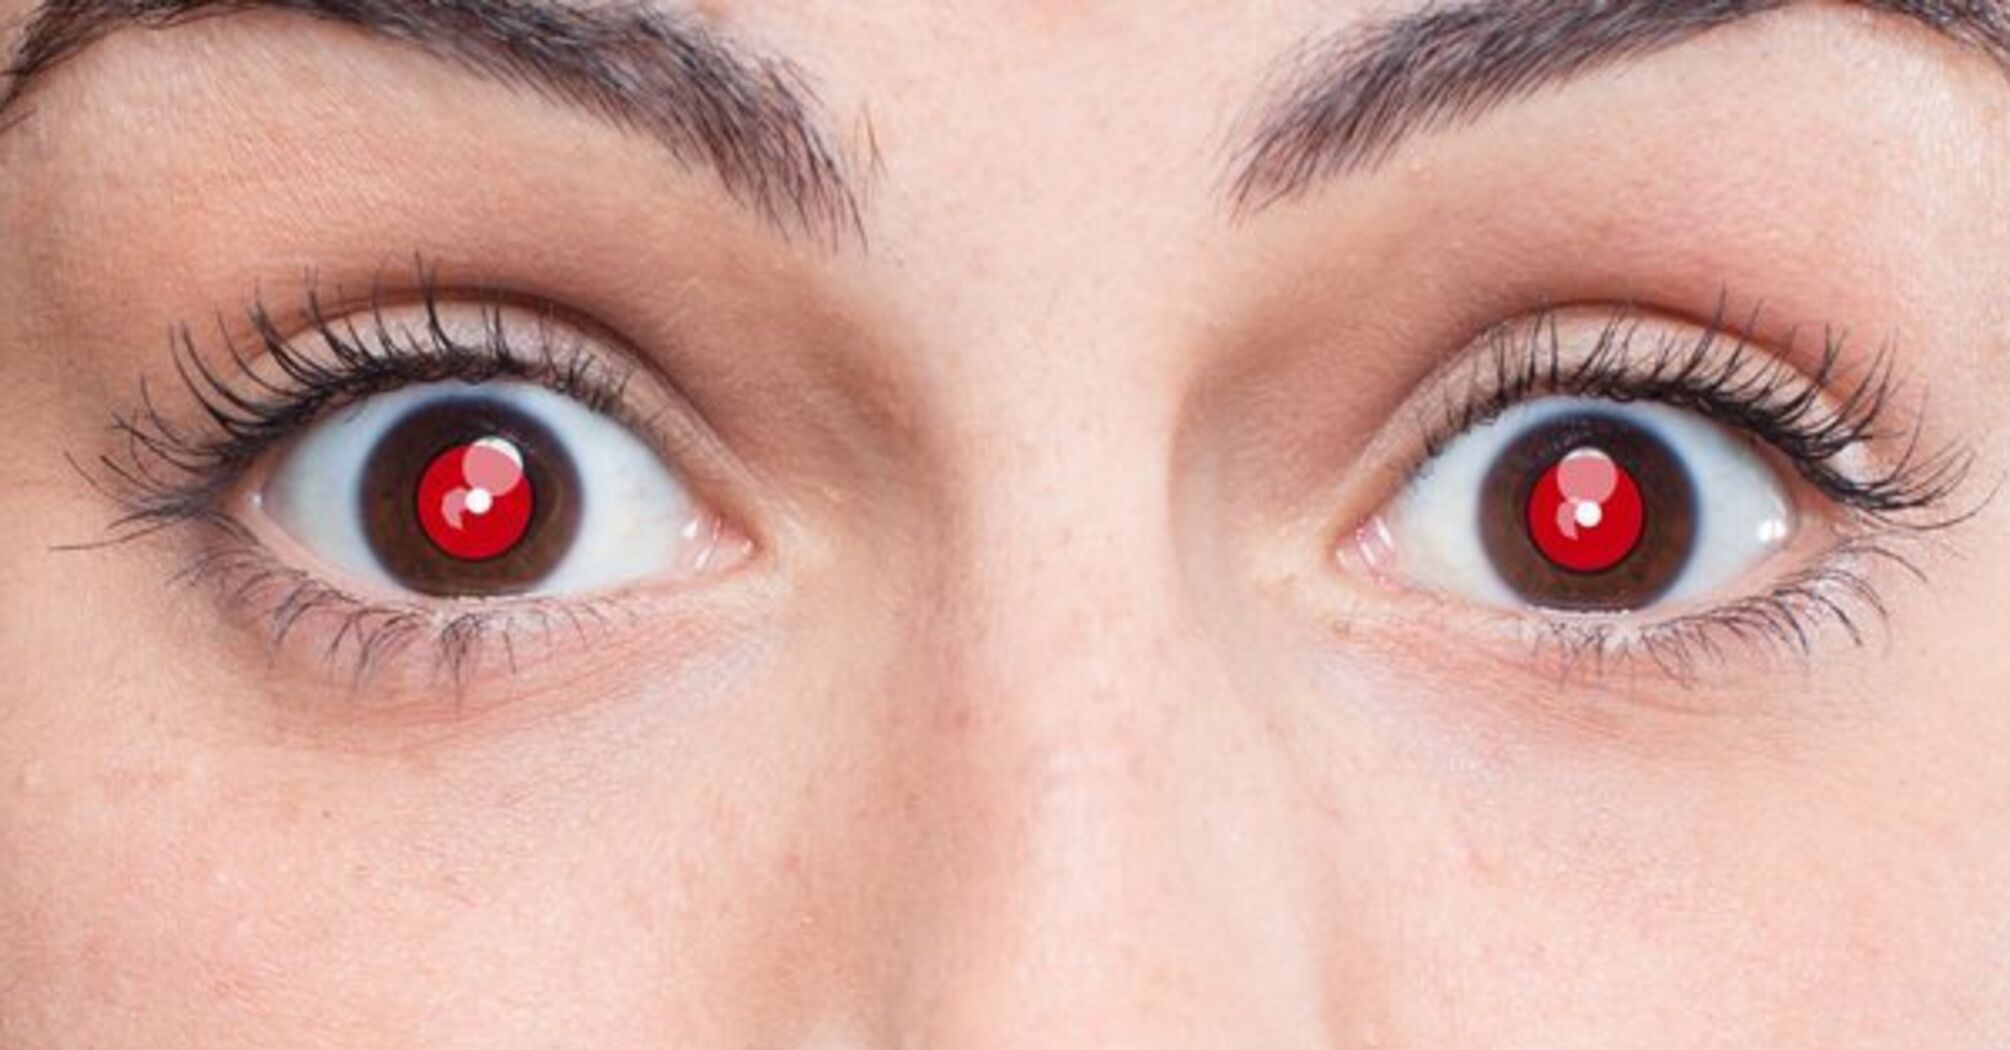 Users were startled to learn why people have red pupils in the photo